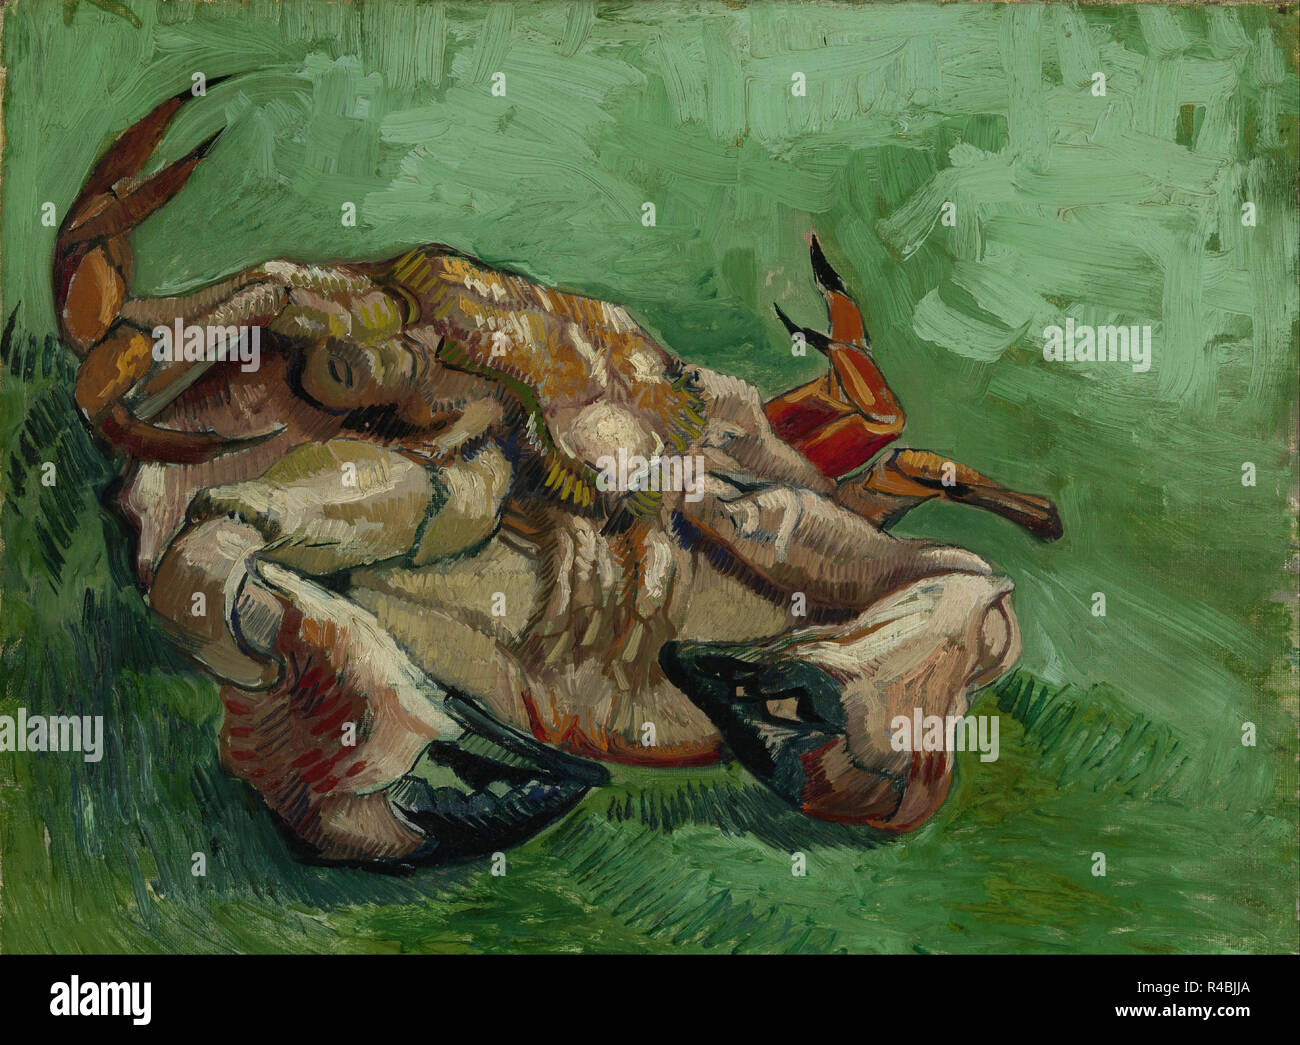 A crab on its back. Date/Period: 1888. Painting. Oil on canvas. 38 × 46.5 cm (14.9 × 18.3 in). Author: VINCENT VAN GOGH. Stock Photo